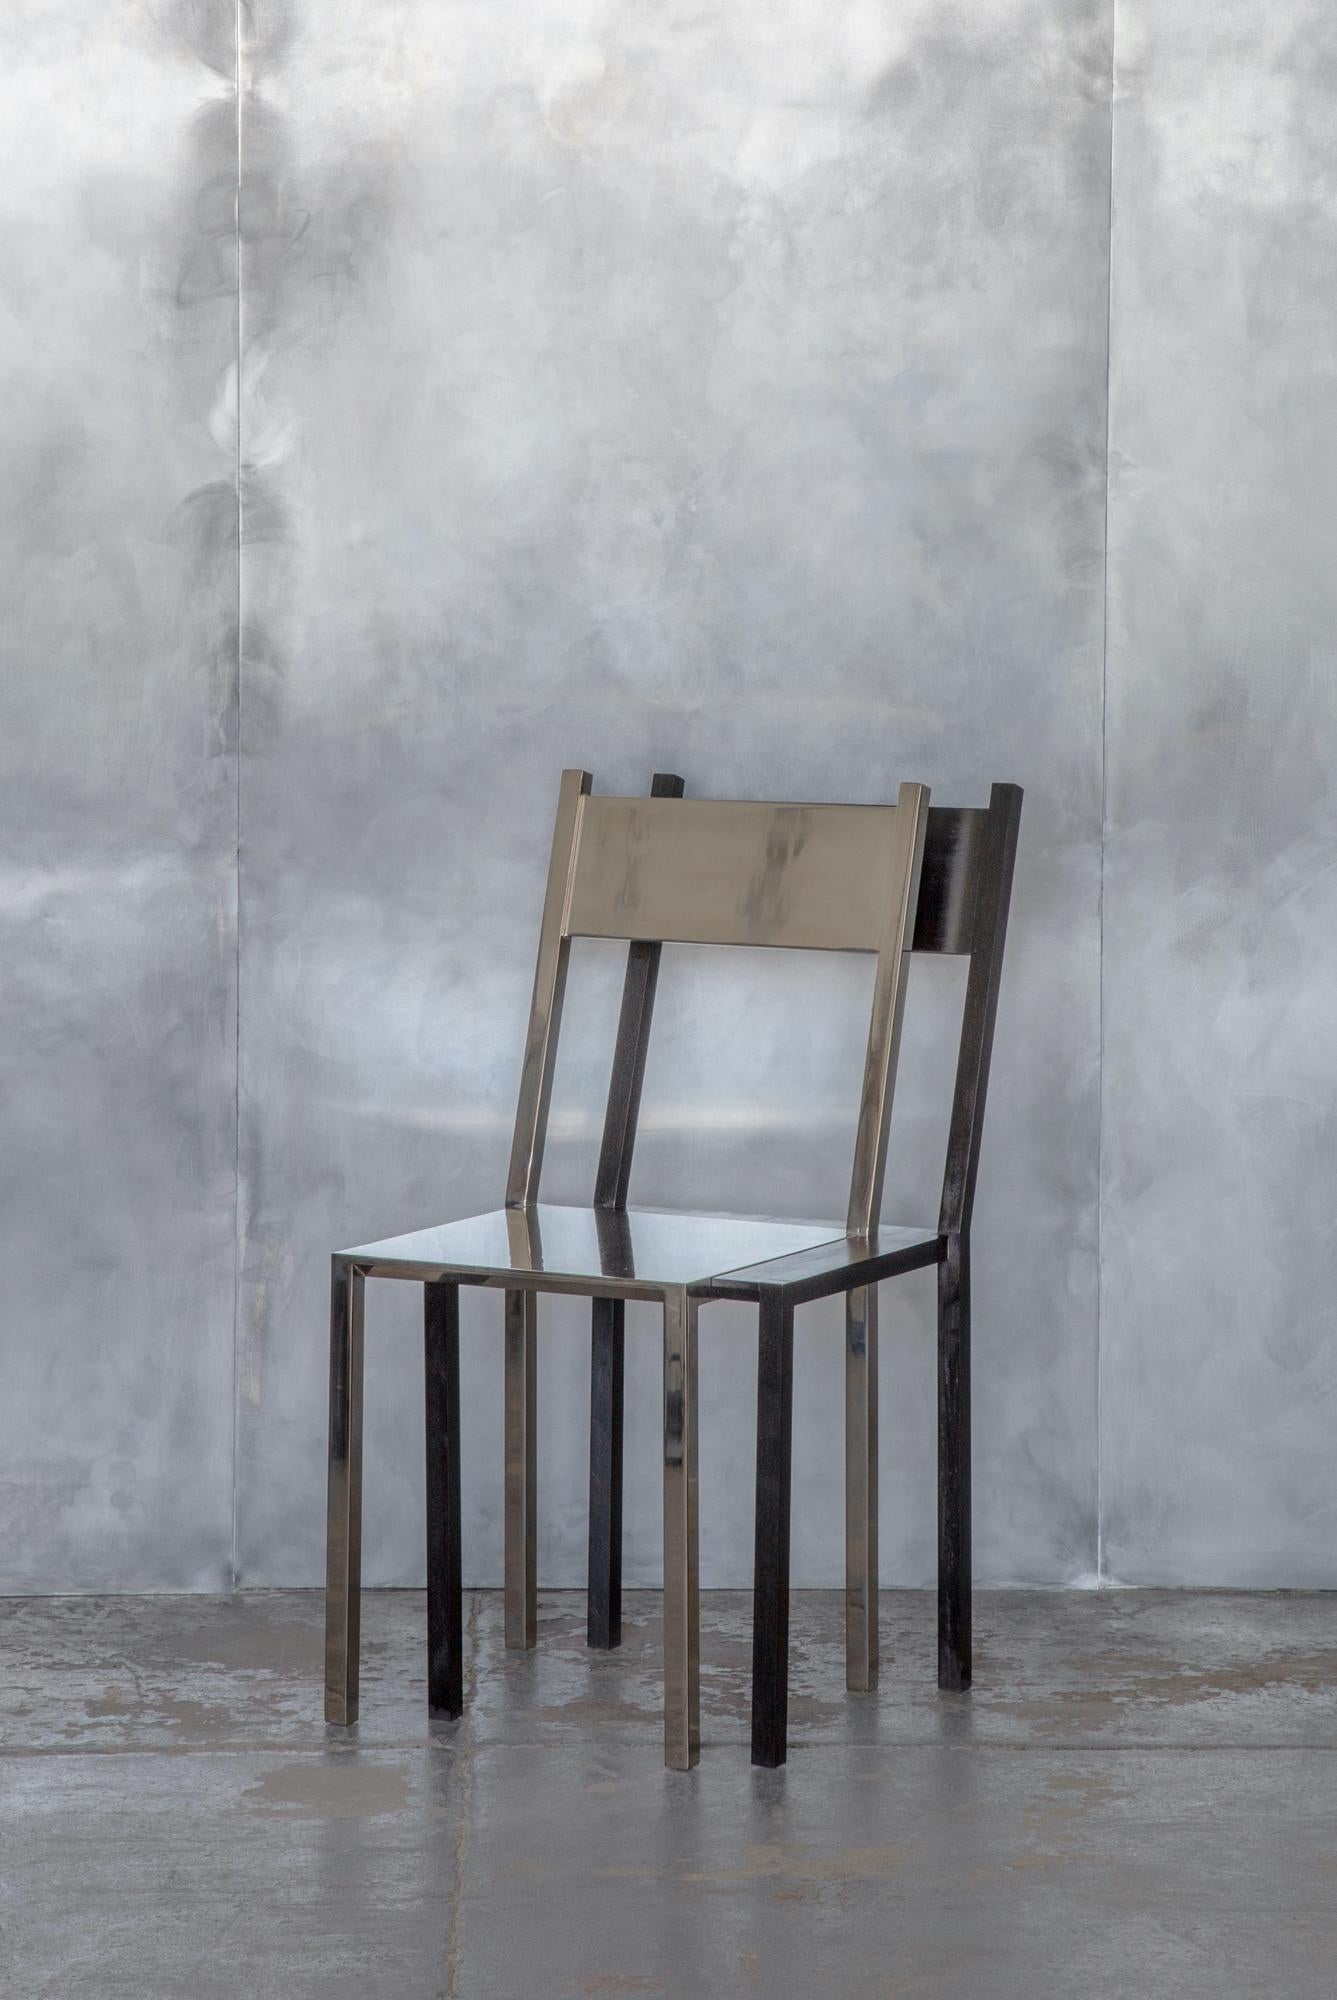 Double vision chair.
Inspired by a myriad of indulgent nights, this chair is meant to share the feeling and effect of “double vision,” the phenomenon of perceiving two images, usually overlapping, as one holistic object. Double vision is often the